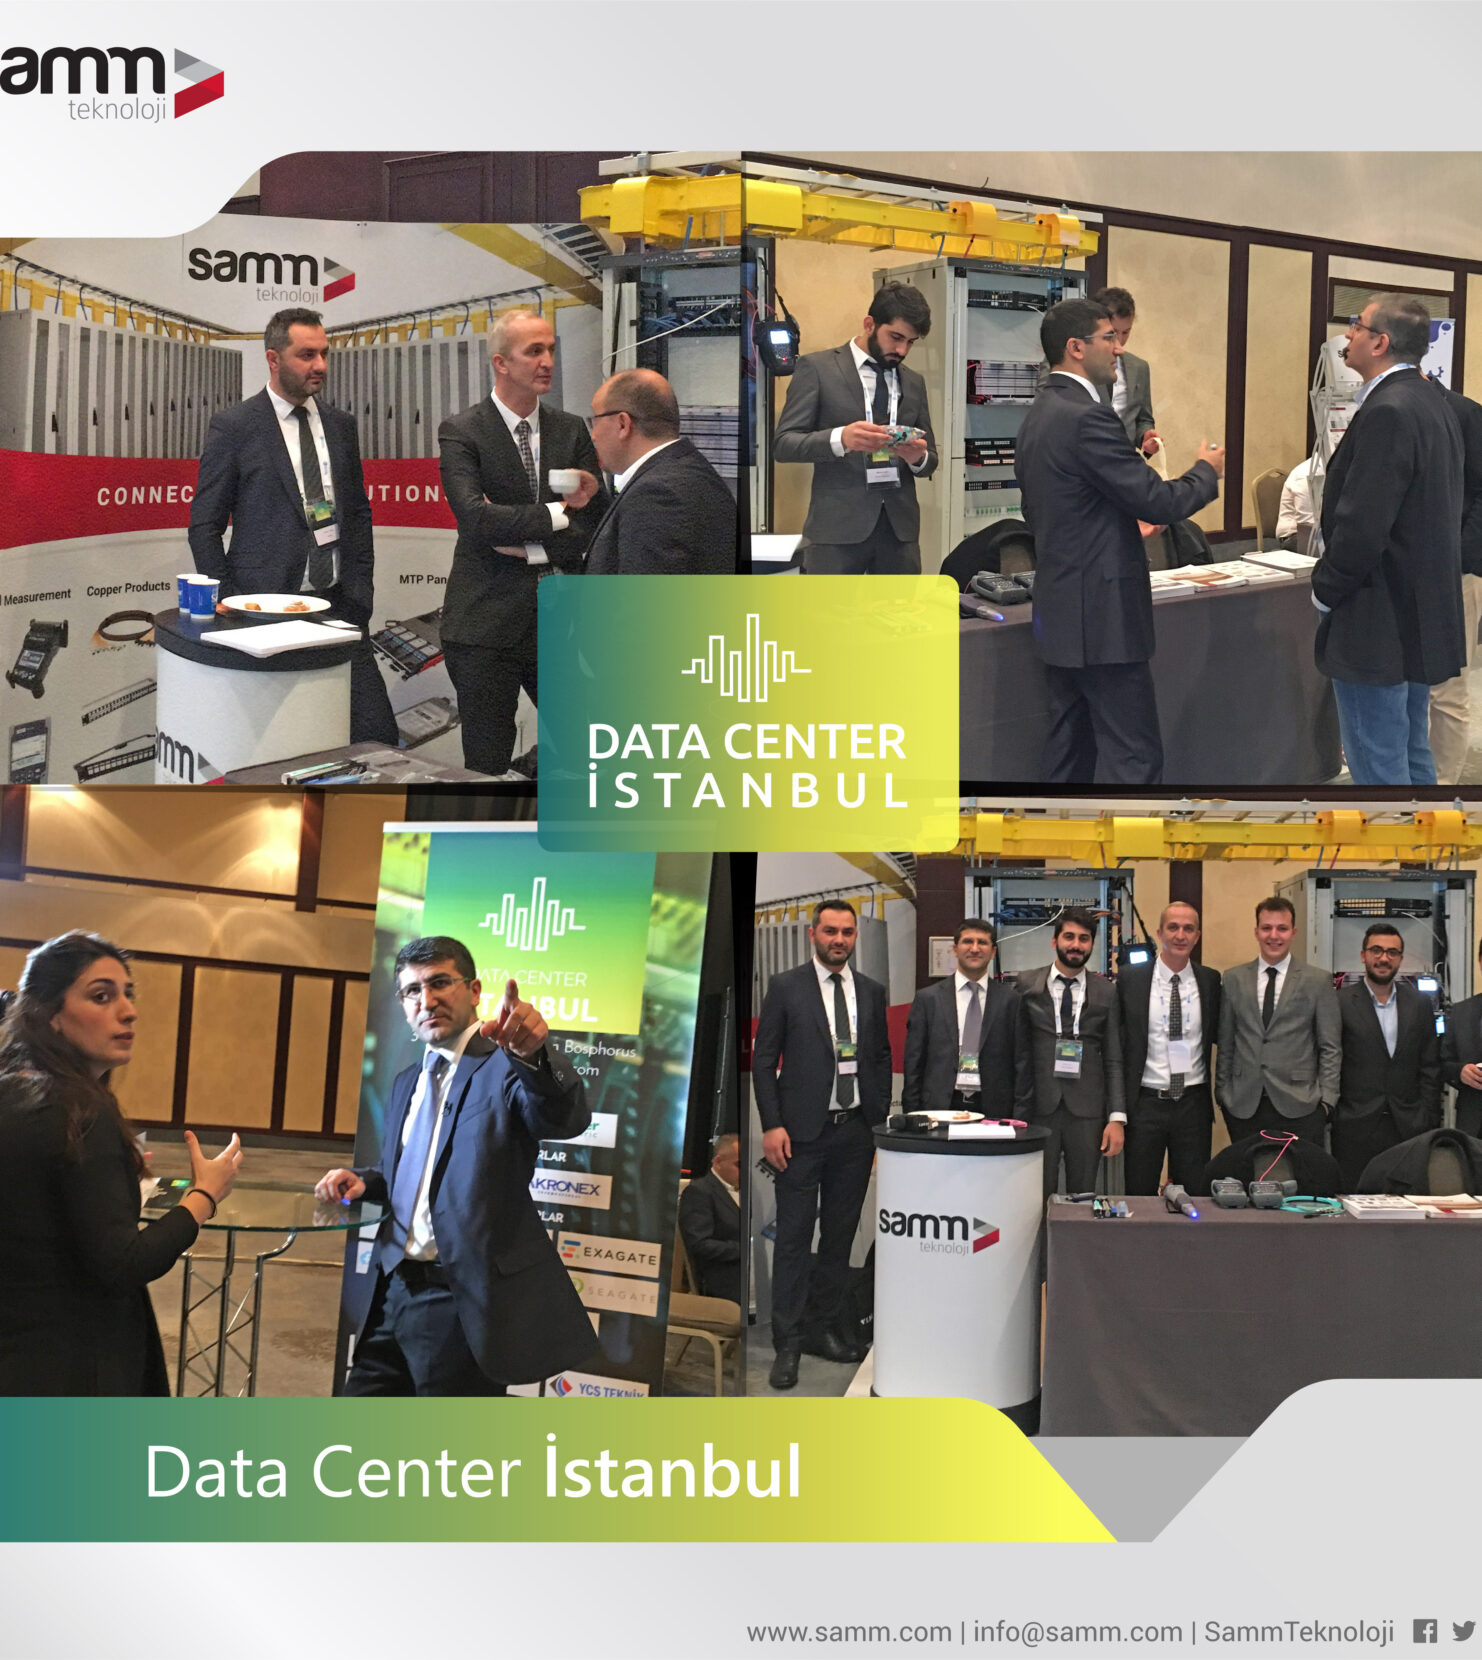 Our Participation at The Data Center Istanbul Exhibition.